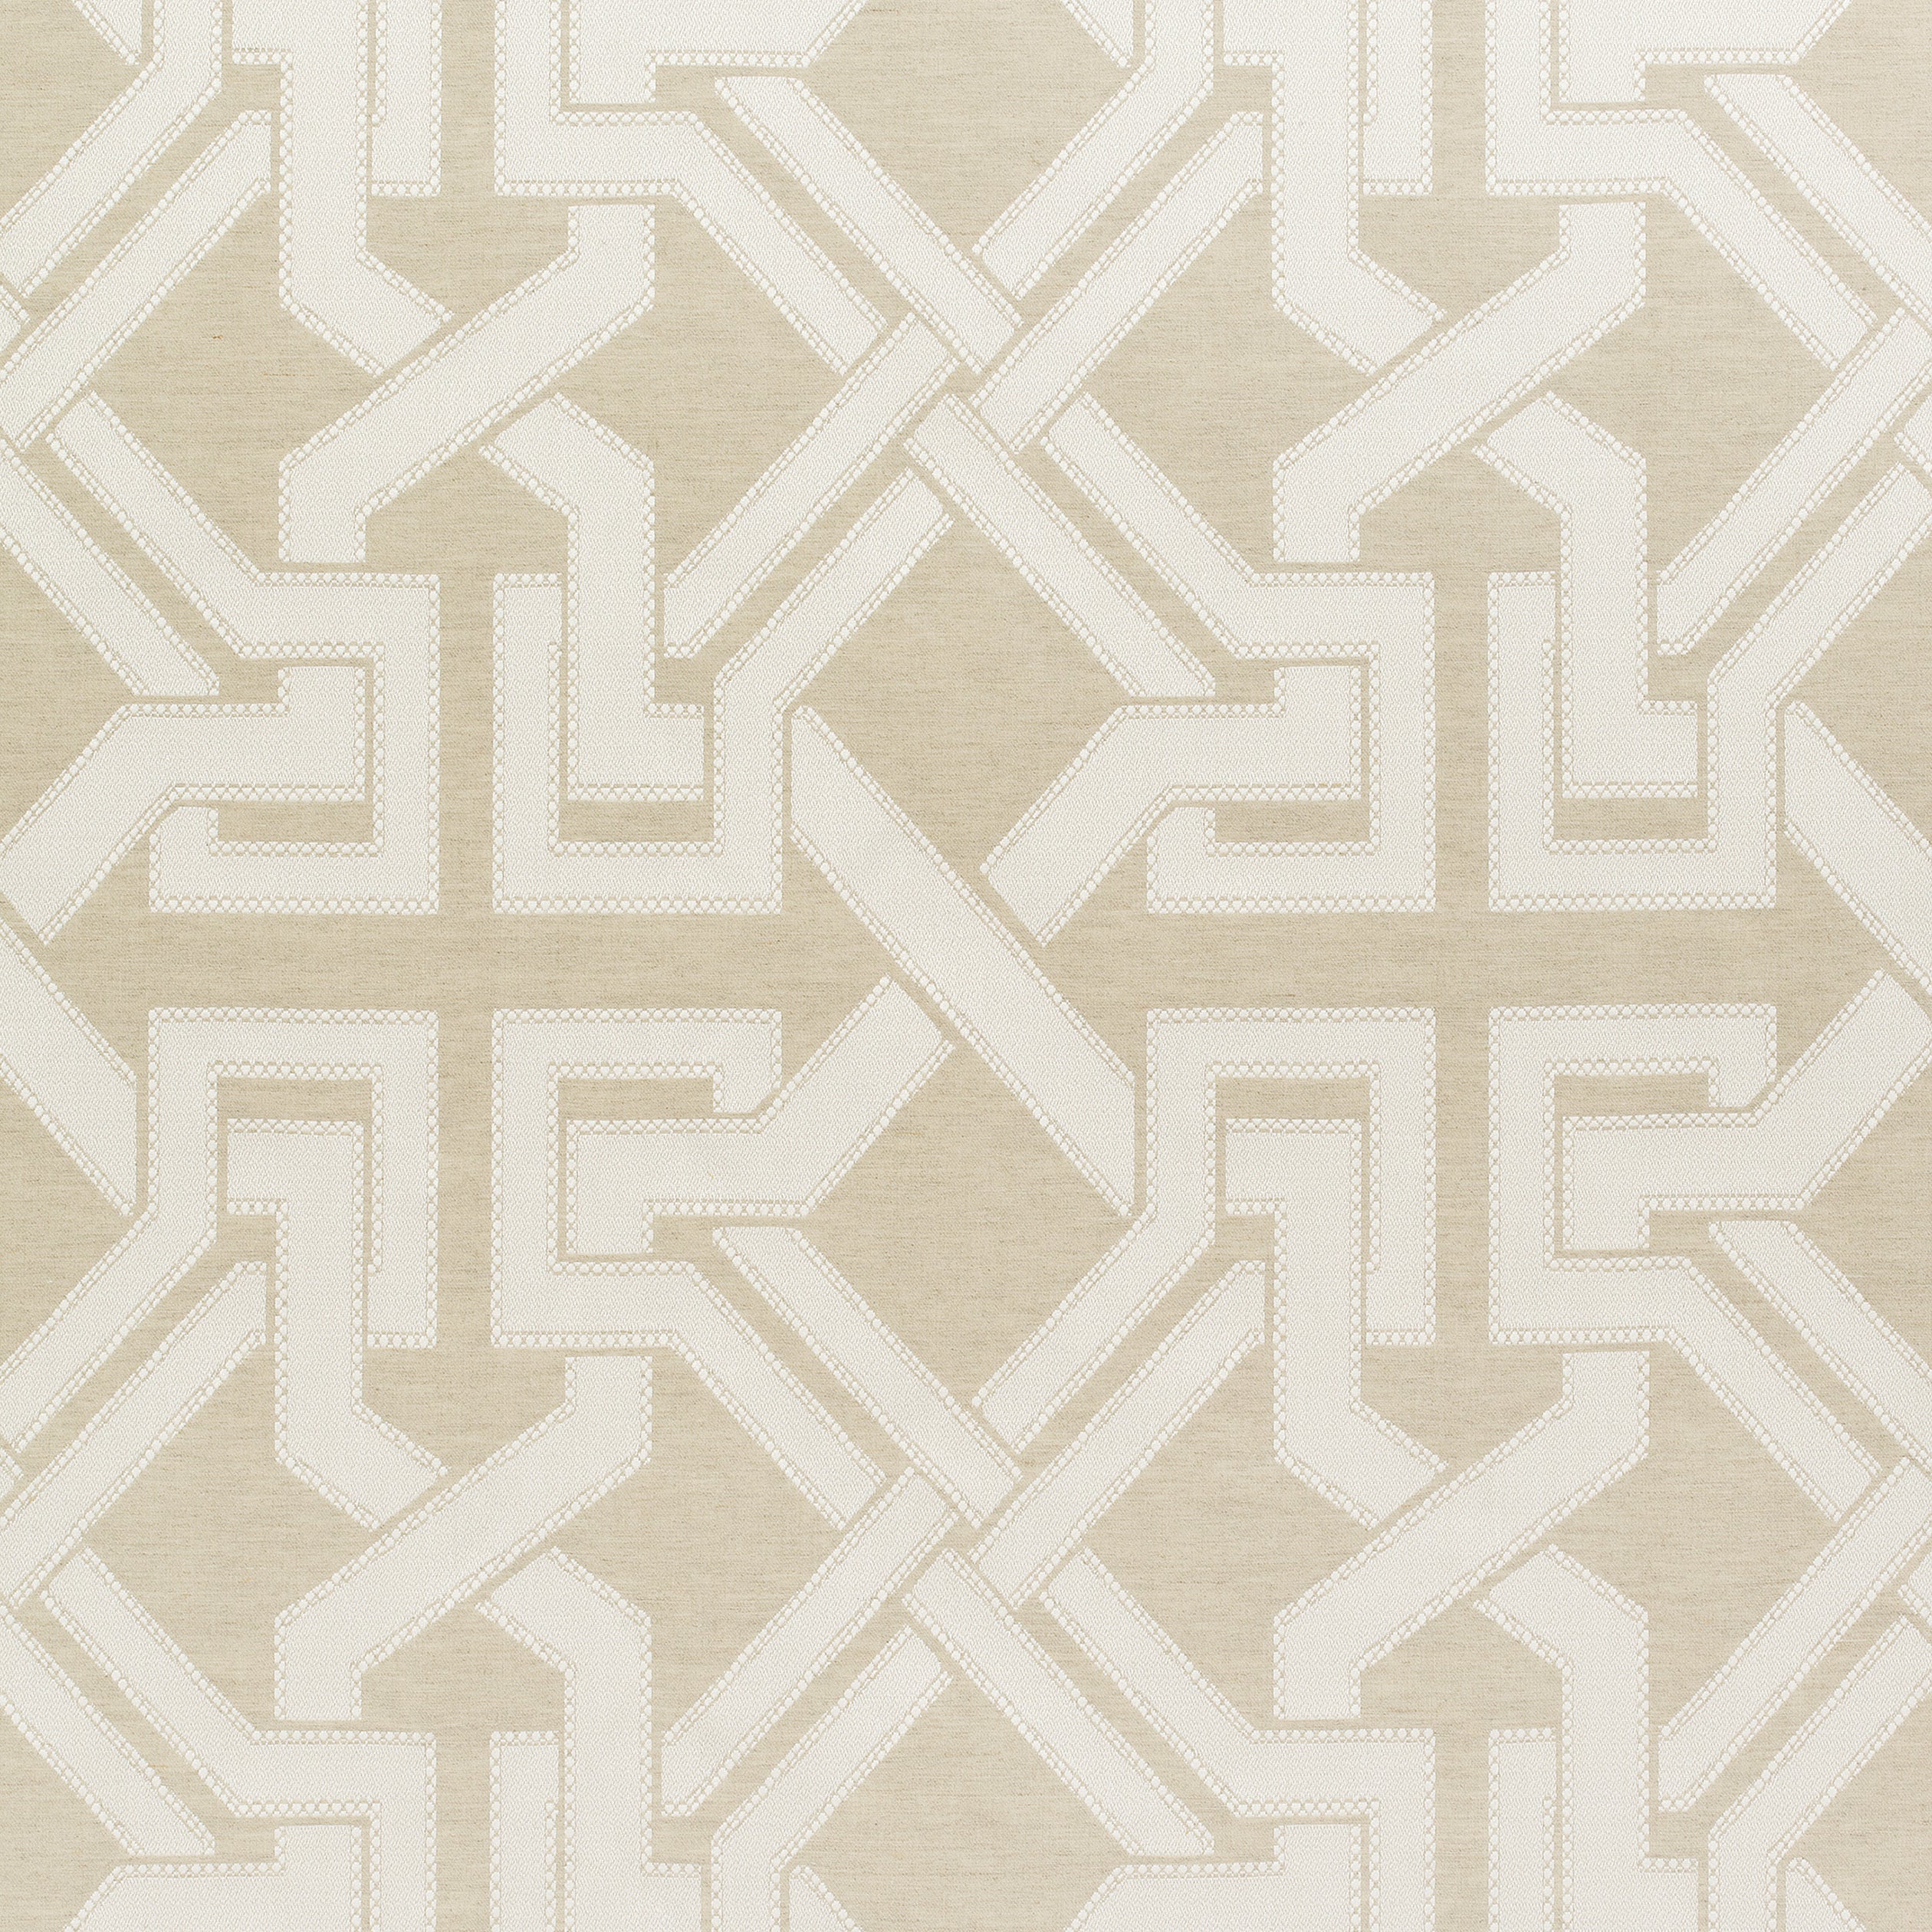 Benedetto fabric in flax color - pattern number W772579 - by Thibaut in the Chestnut Hill collection